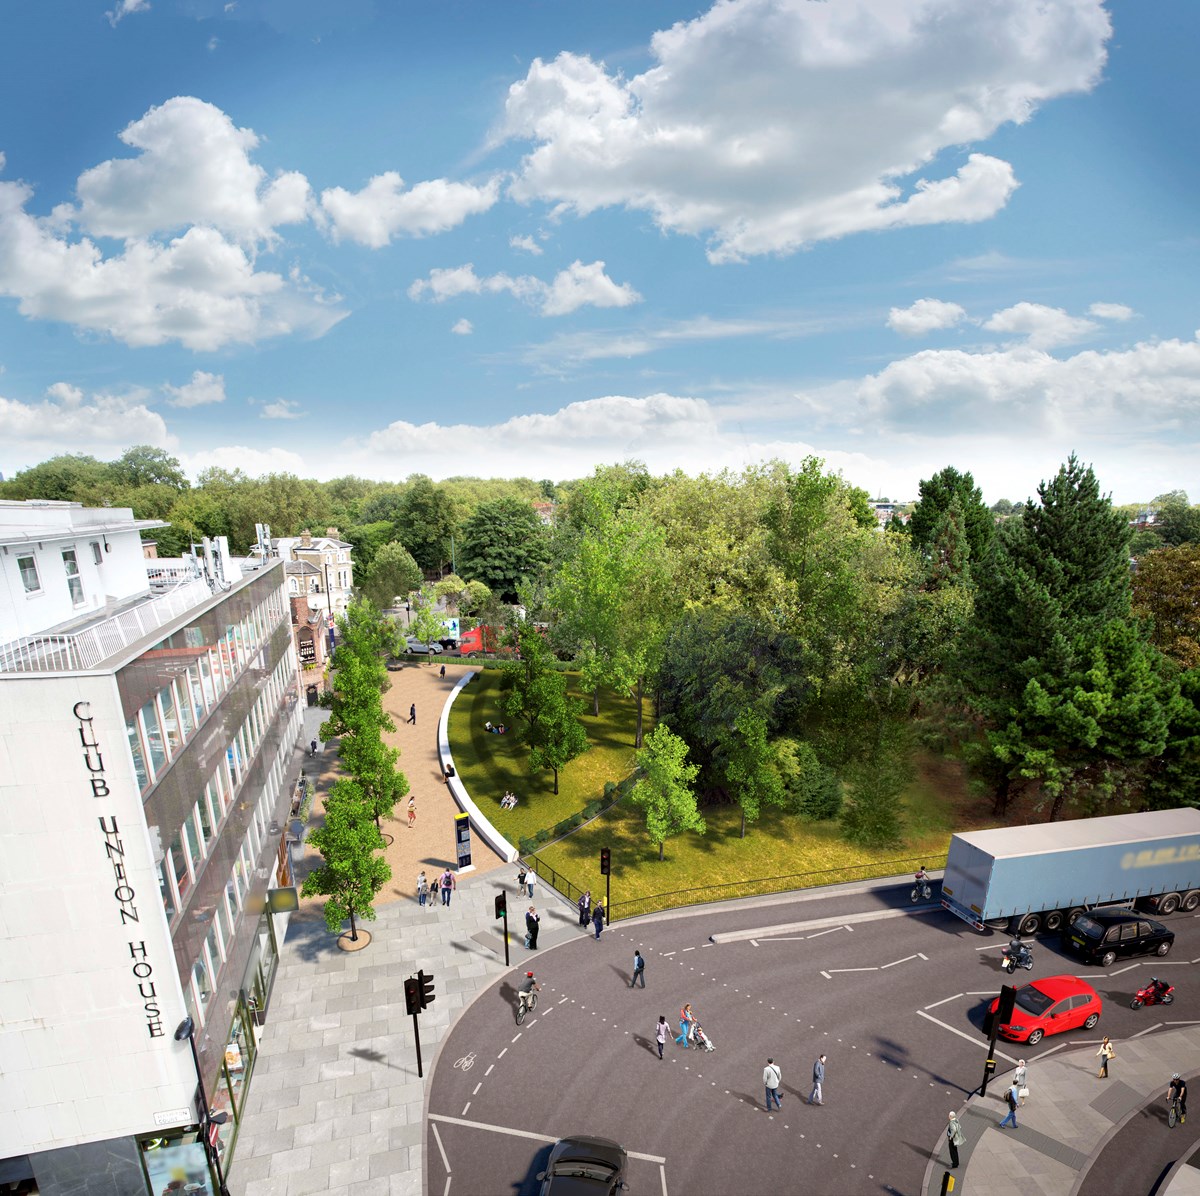 An artist's impression of the completed works at Highbury Corner.